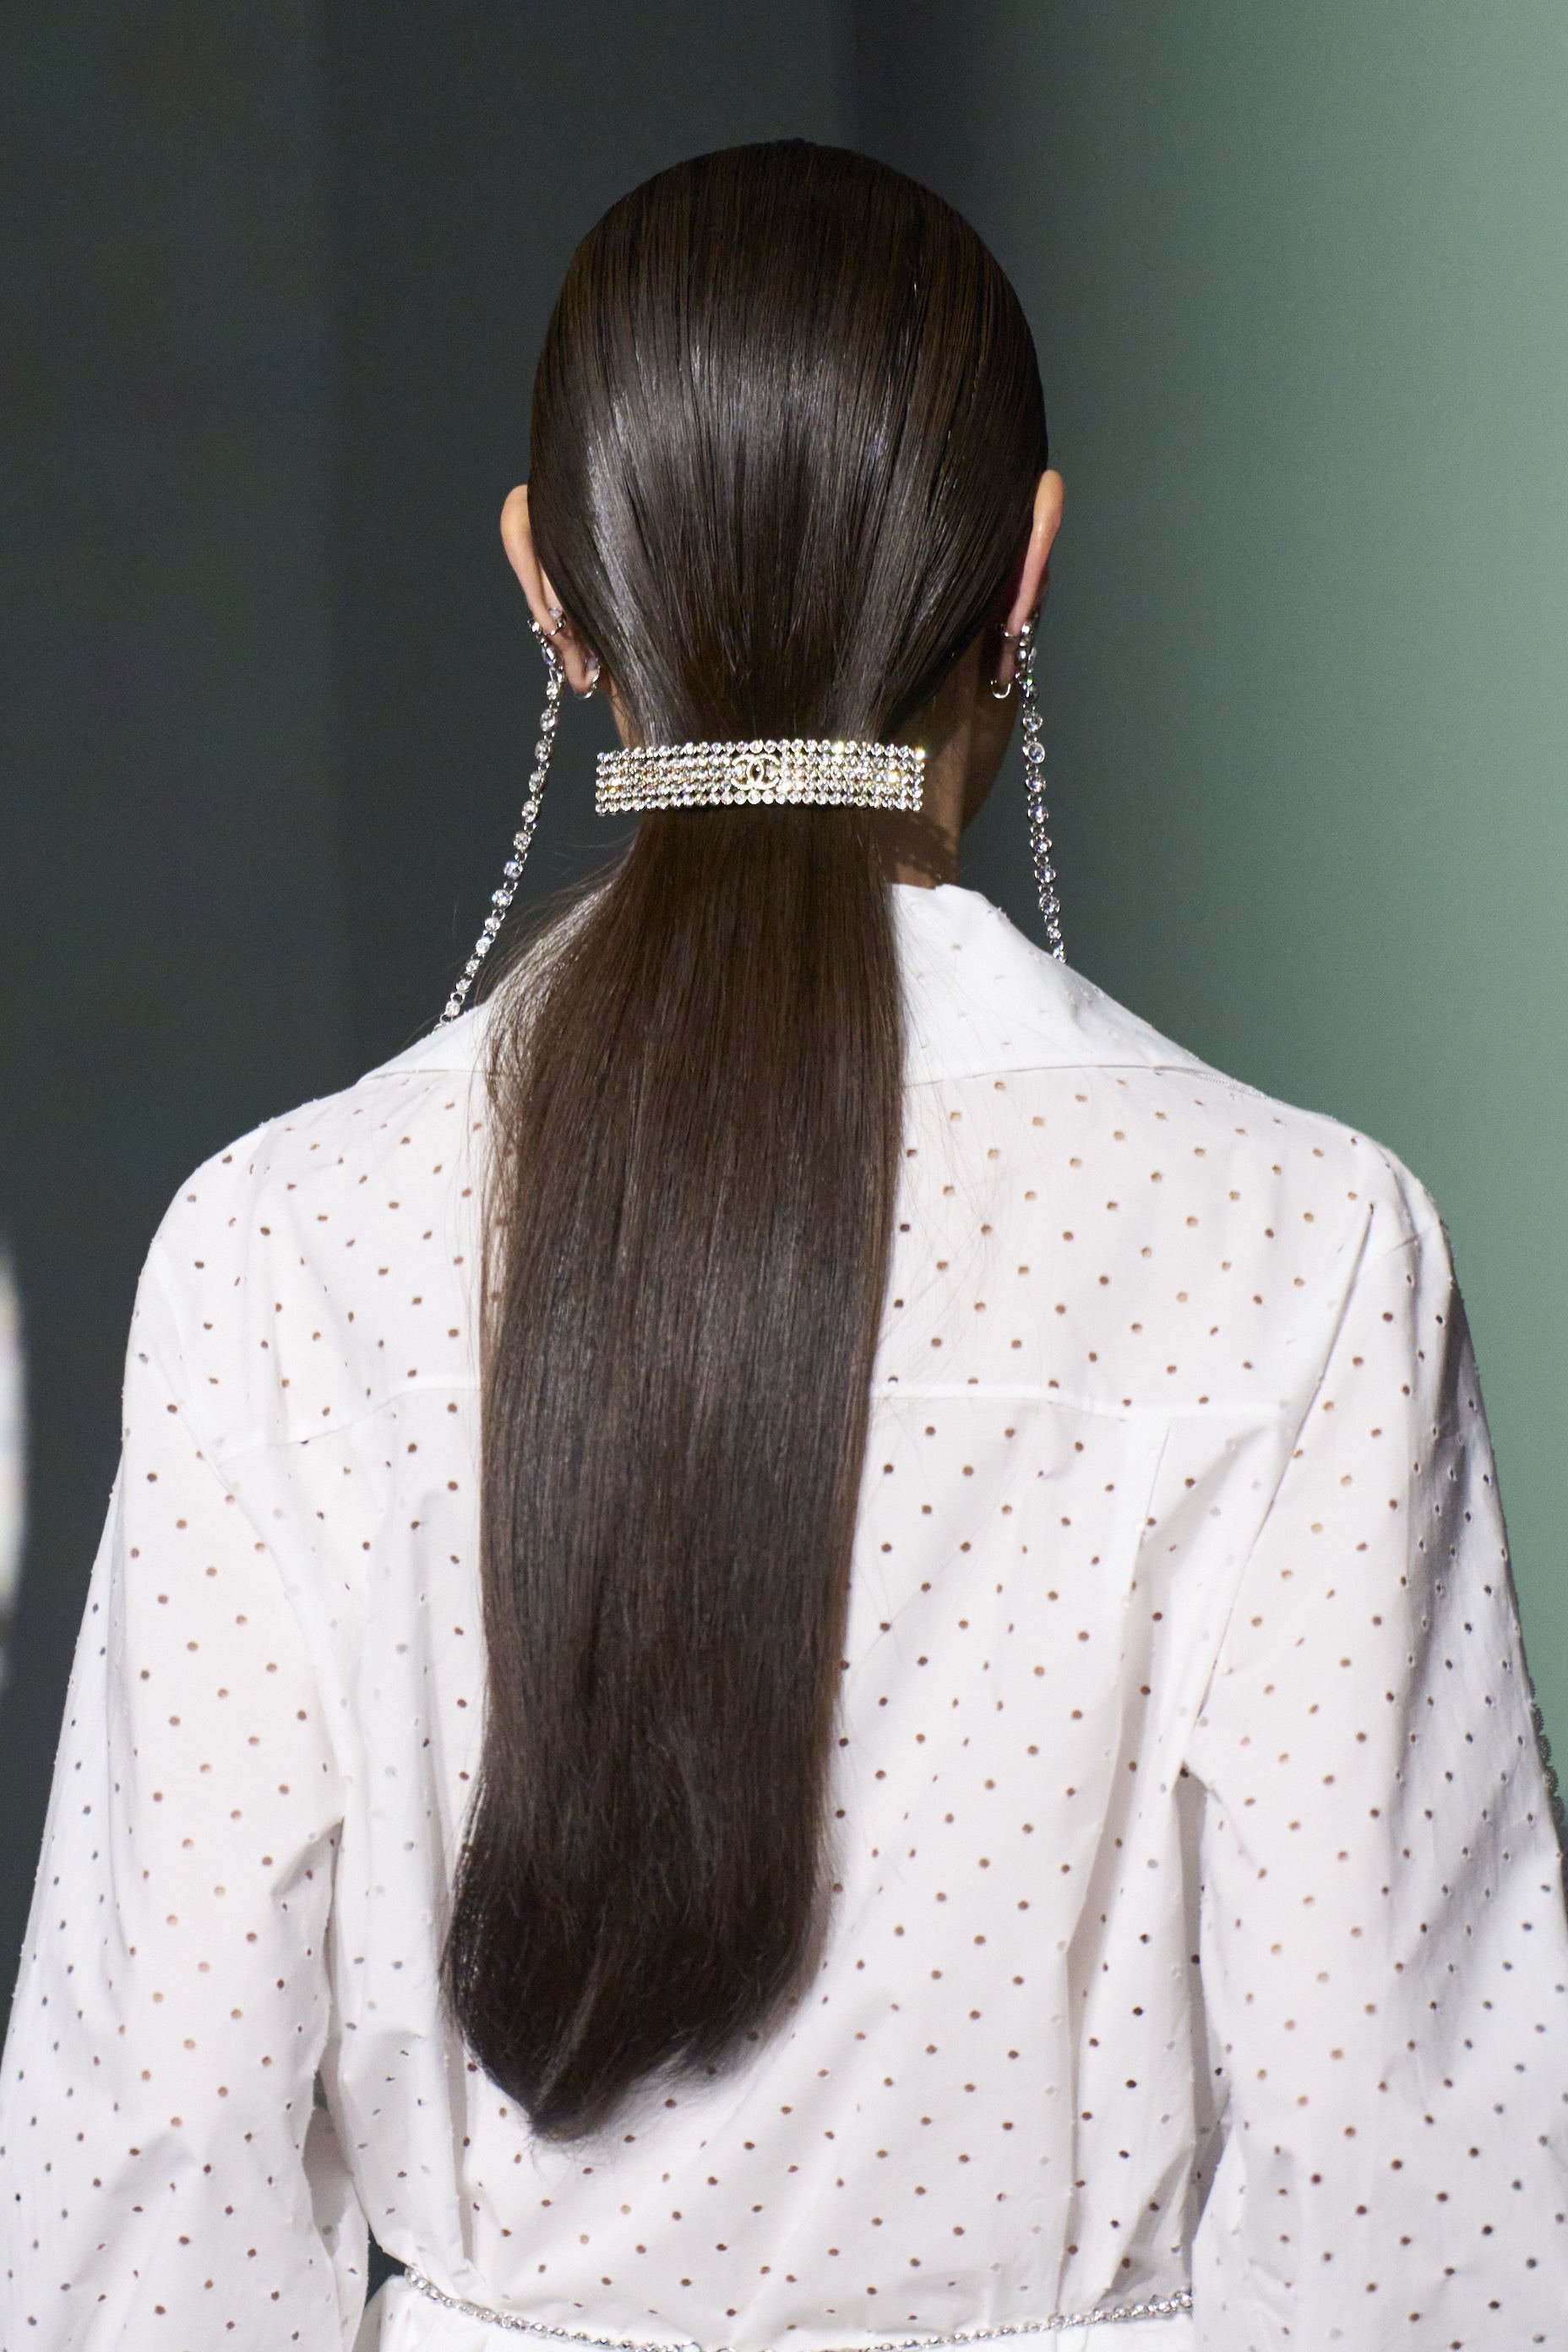 The horizontal hair clips with rhinestones and the logo on smooth and shiny hair have become our beauty objective of the season.